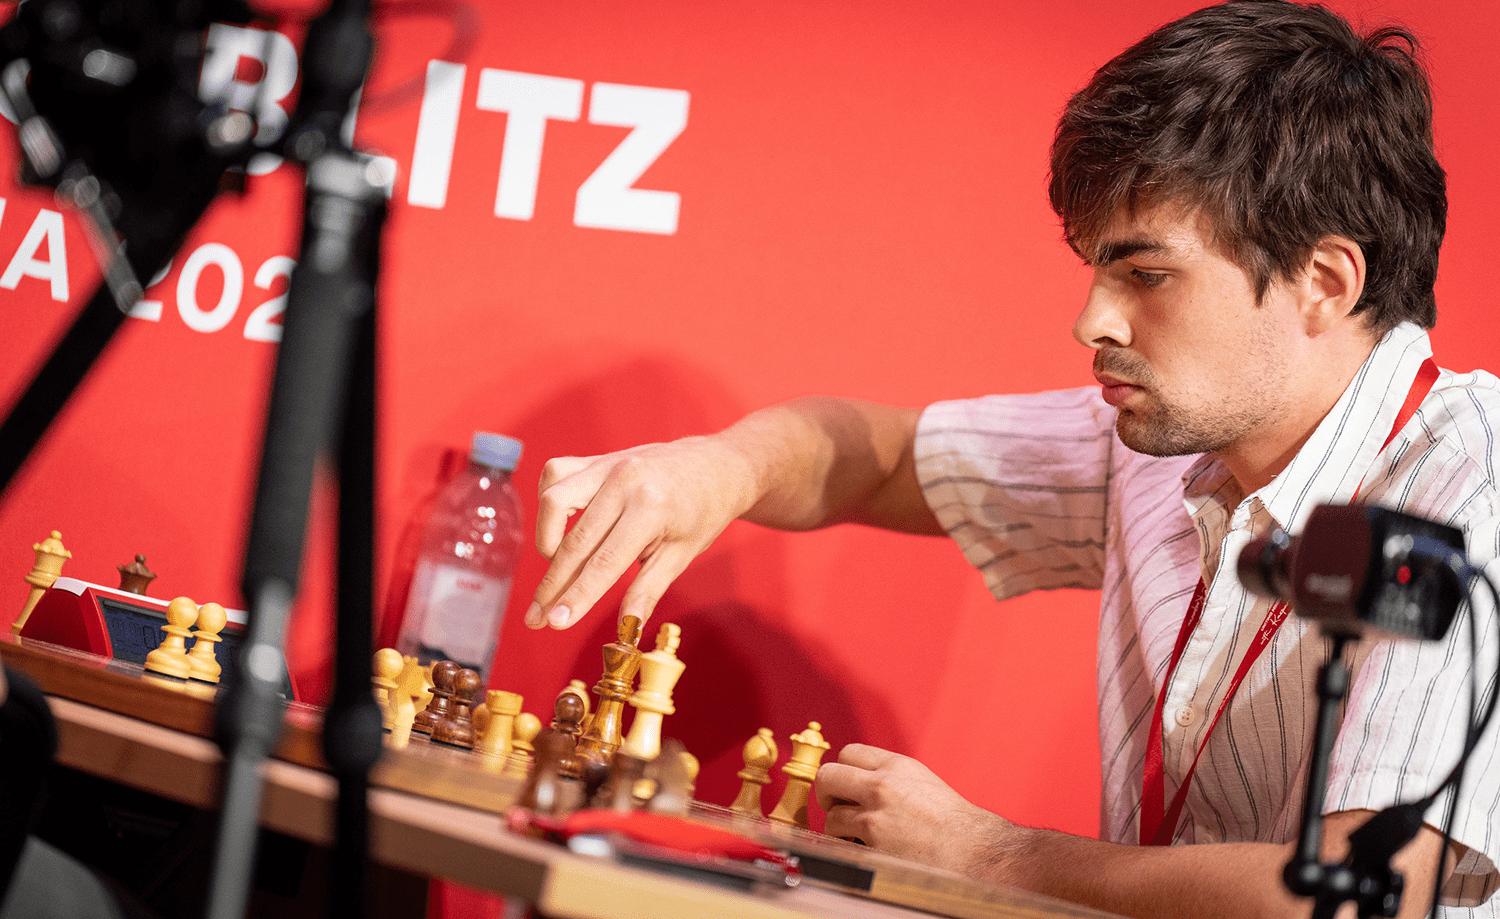 Carlsen didn't retire from chess, won the Super United Croatia 2022